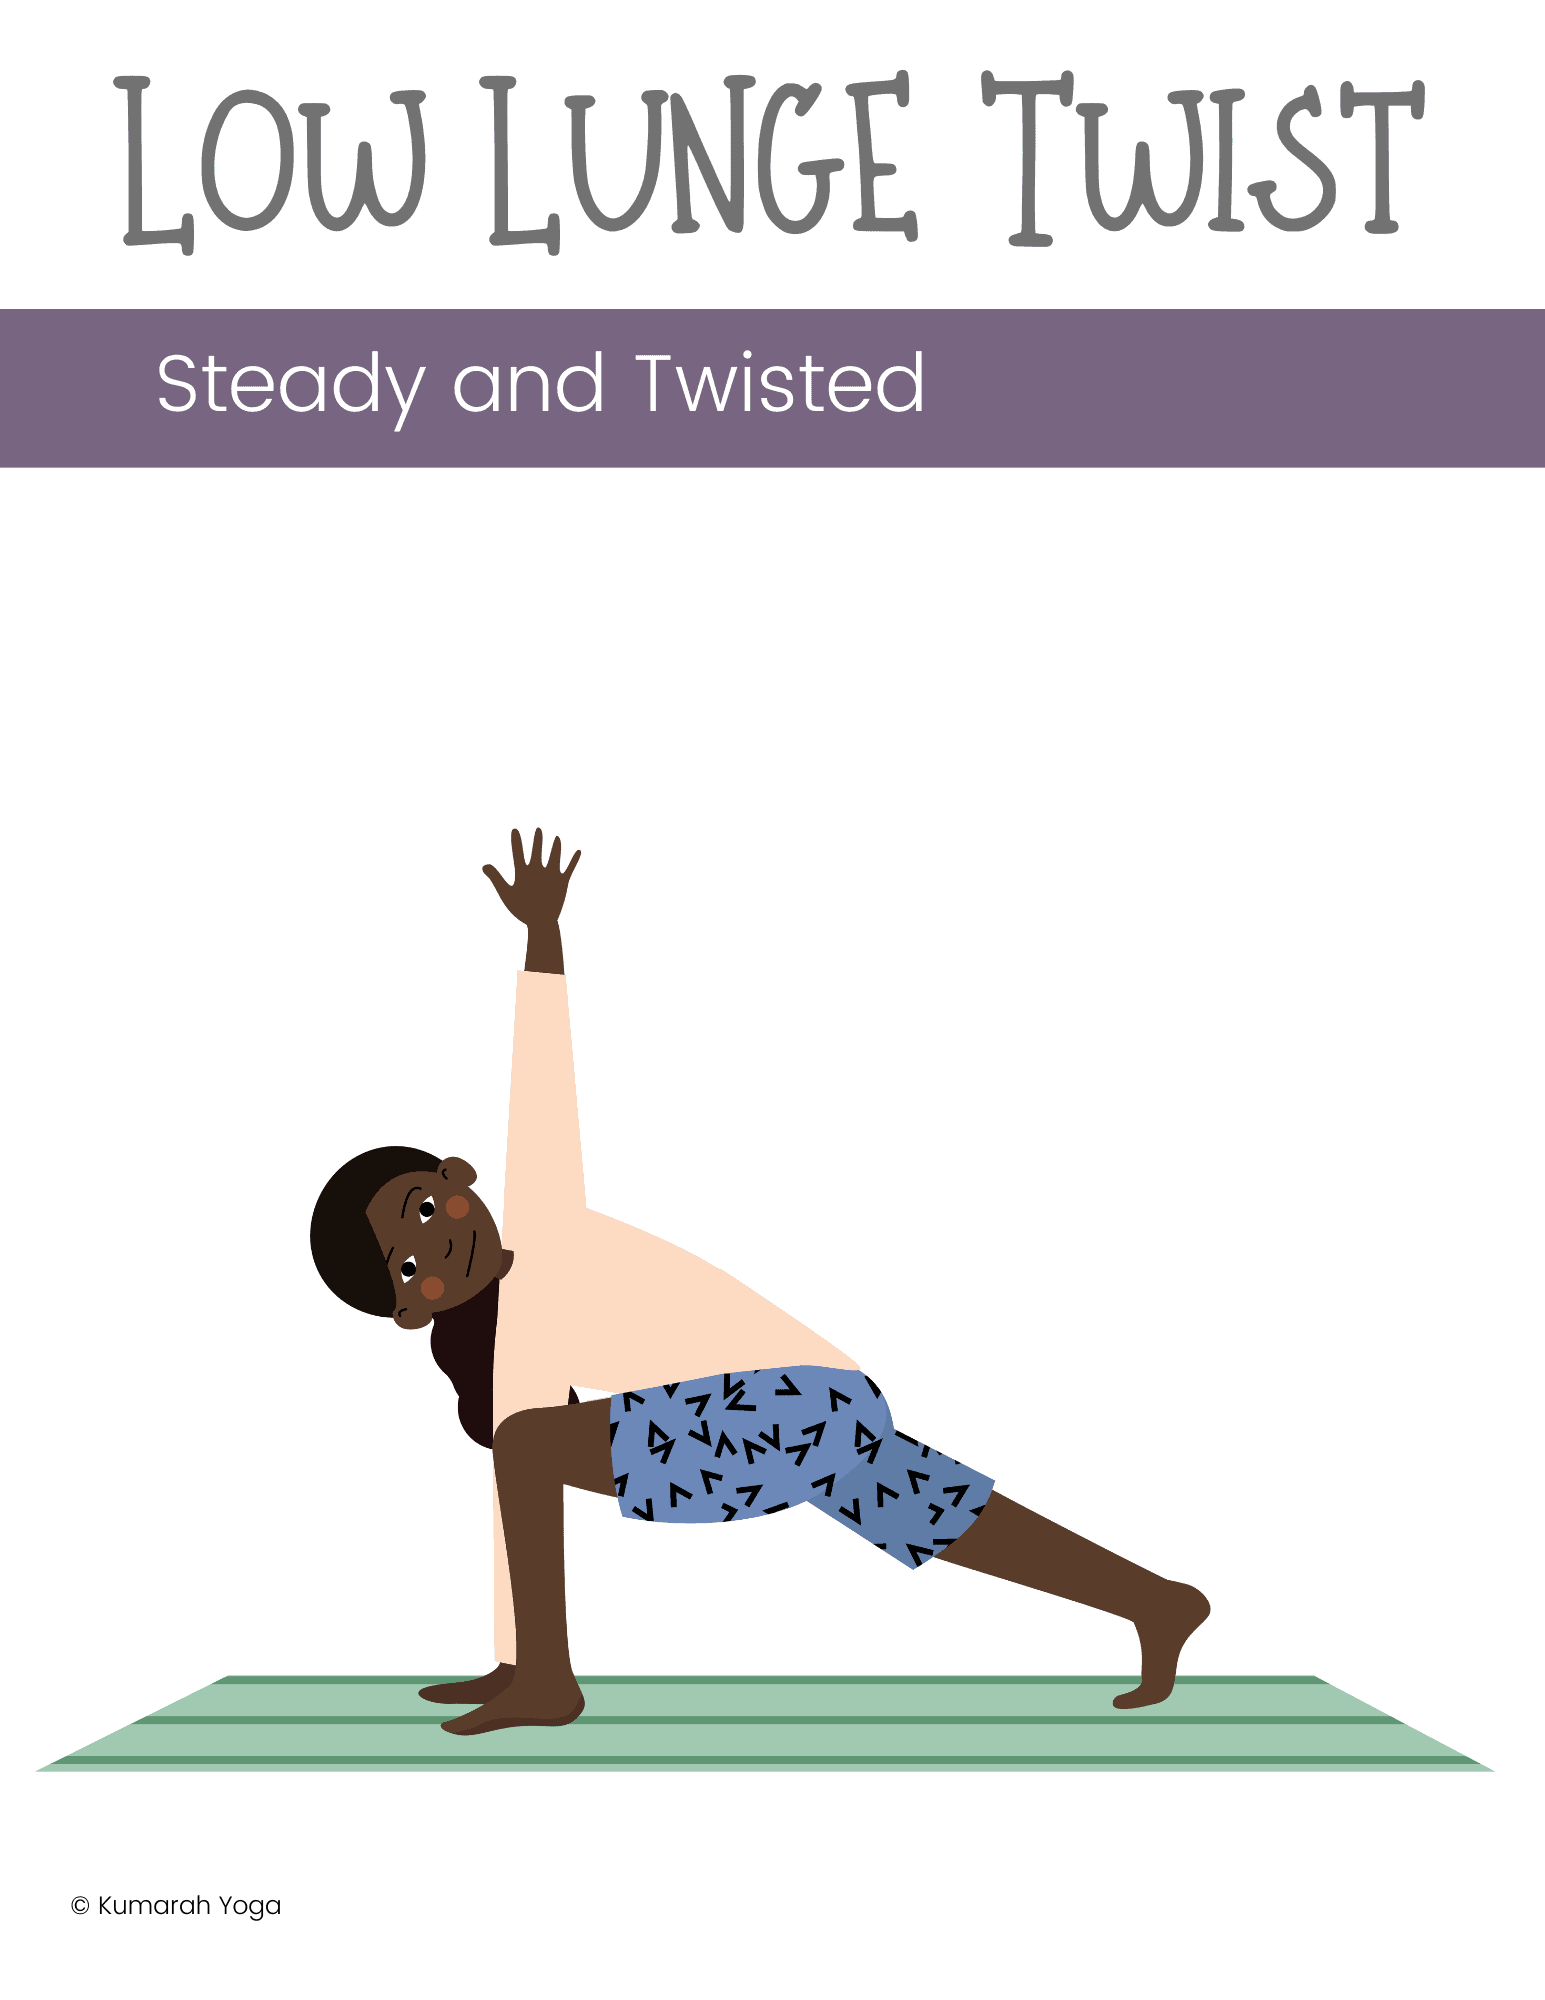 Yoga Poses for Kids Cards (Deck 1) - For Classroom Yoga, PE Exercise  Equipment, Memory Yoga Game, Brain Breaks, Movement Breaks, Play Therapy, Kids  Yoga Class, Autism Therapy Games, or ADHD Tools: